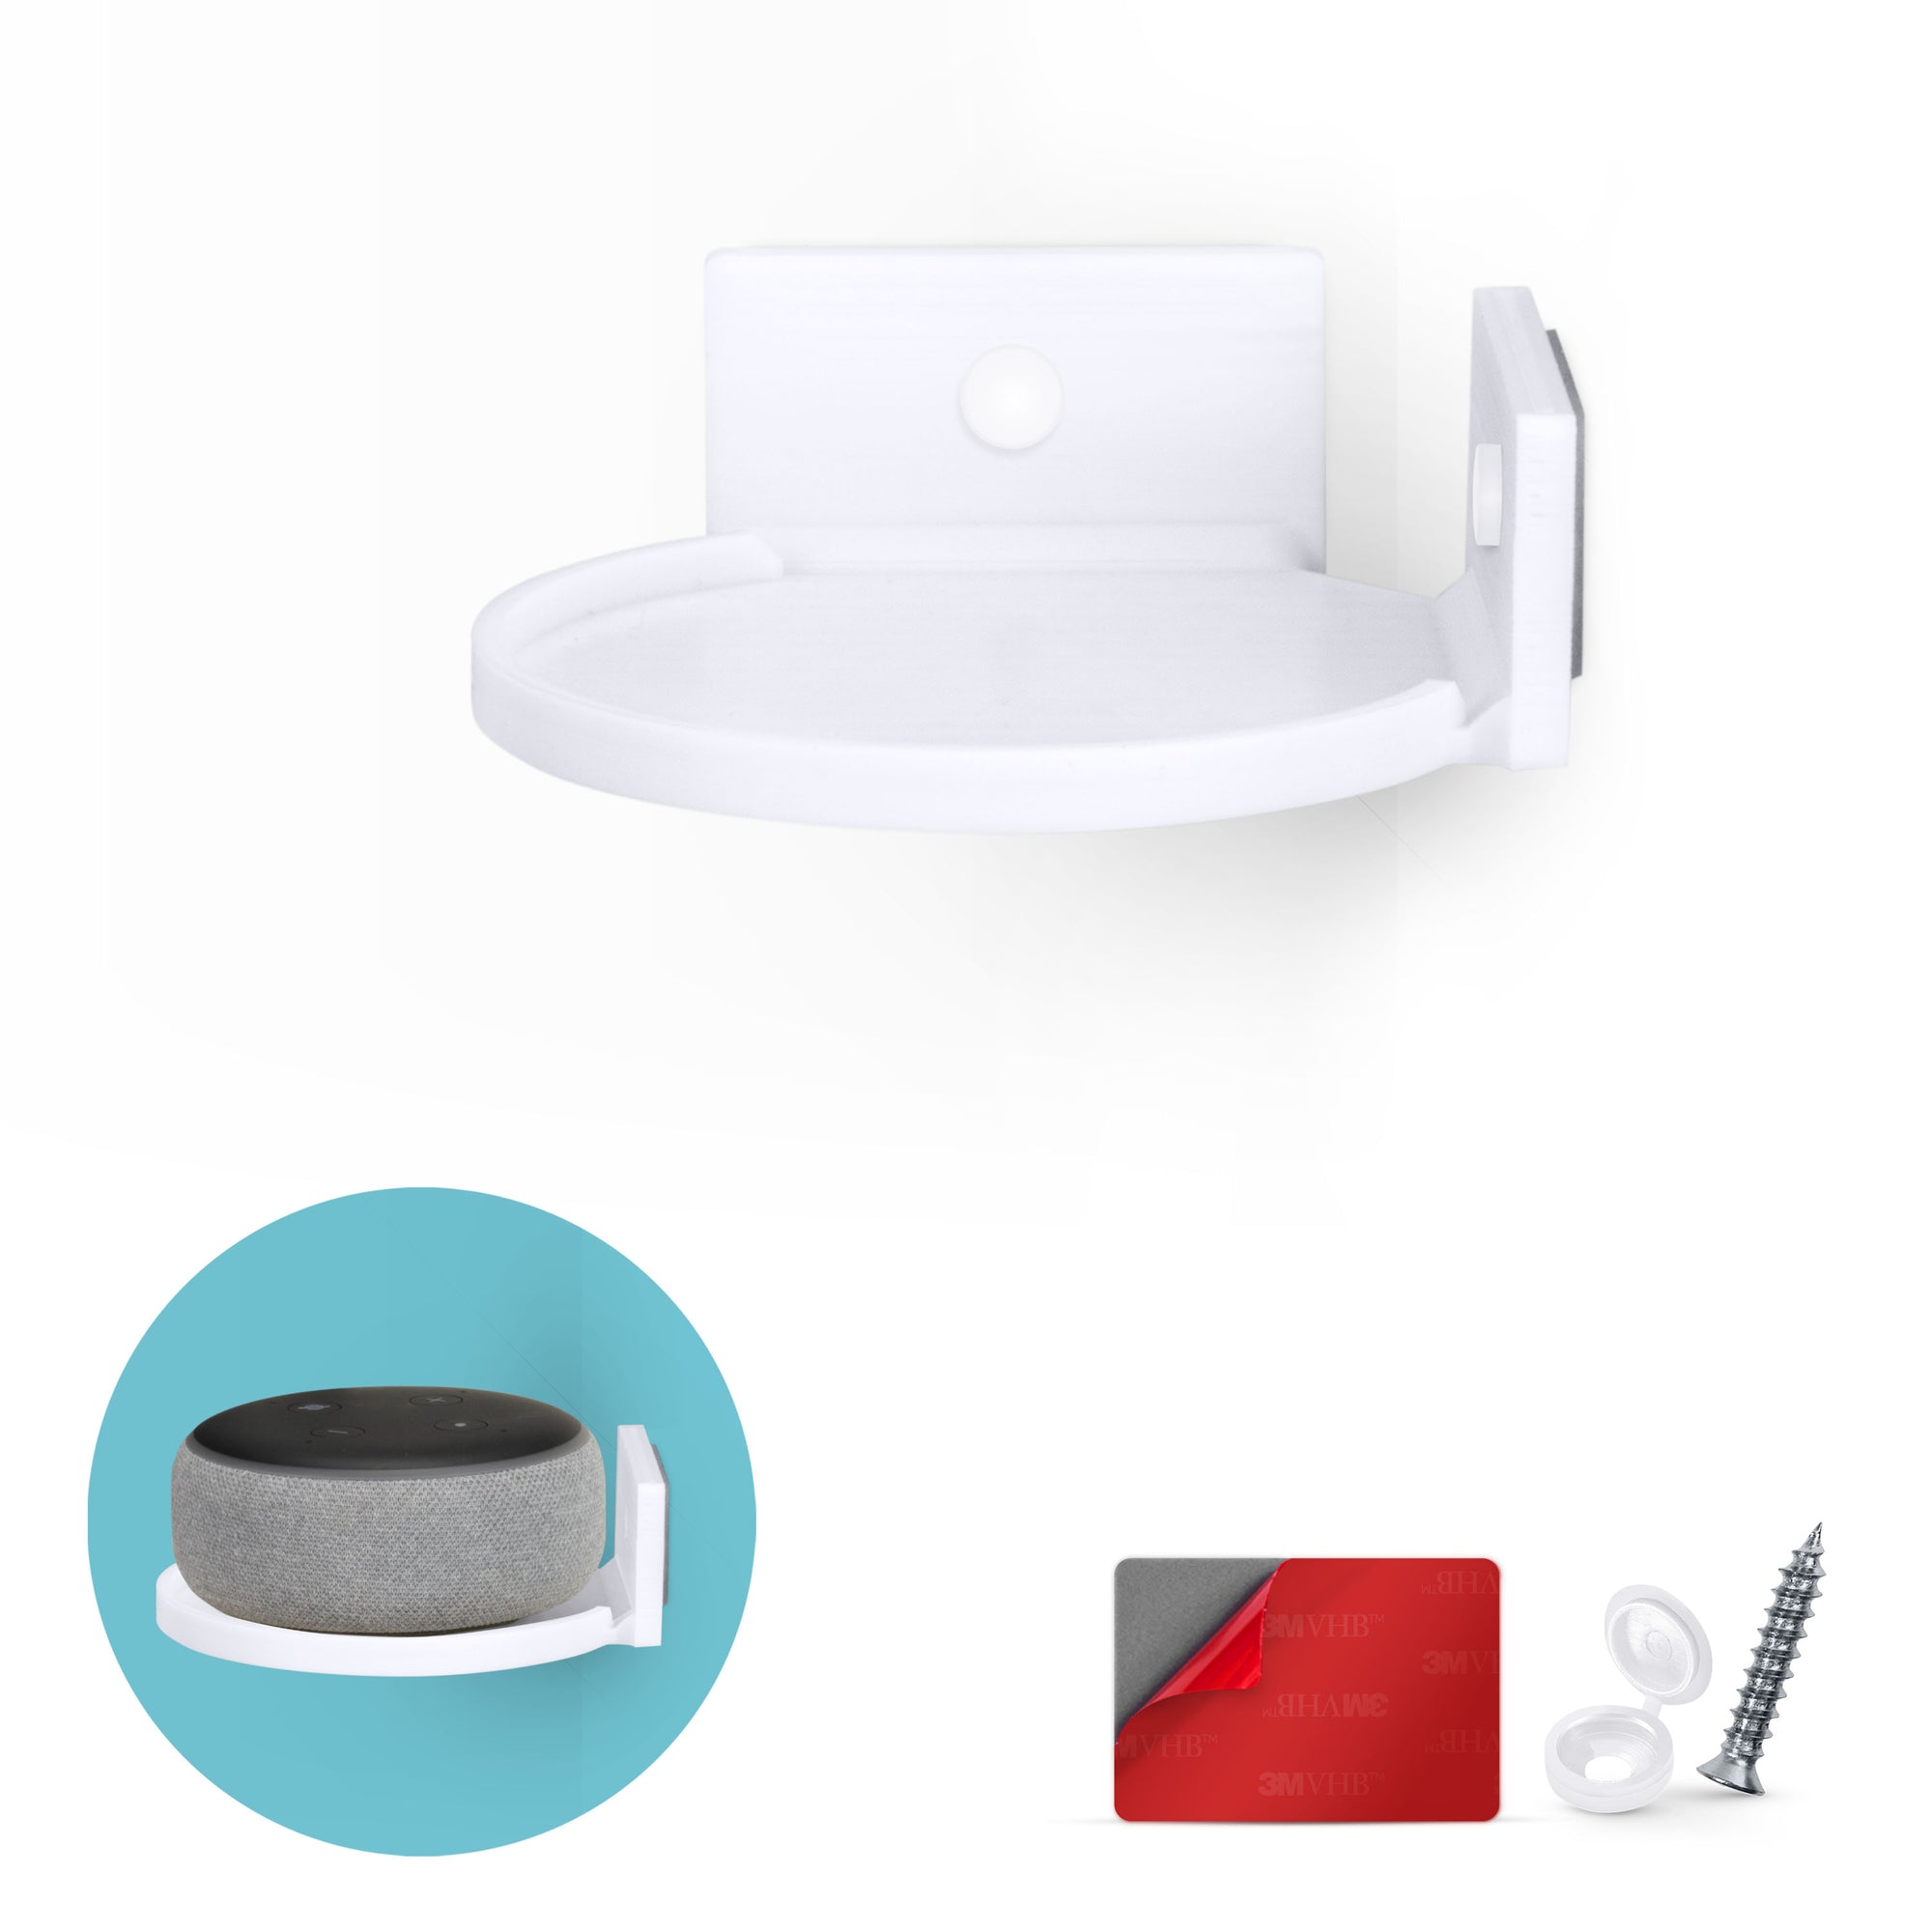 4” Small Floating Shelf, Adhesive & Screw In, For Bluetooth Speakers, Cameras, Plants, Toys, Books & More, Easy to Install Shelves Wall Mount (White)